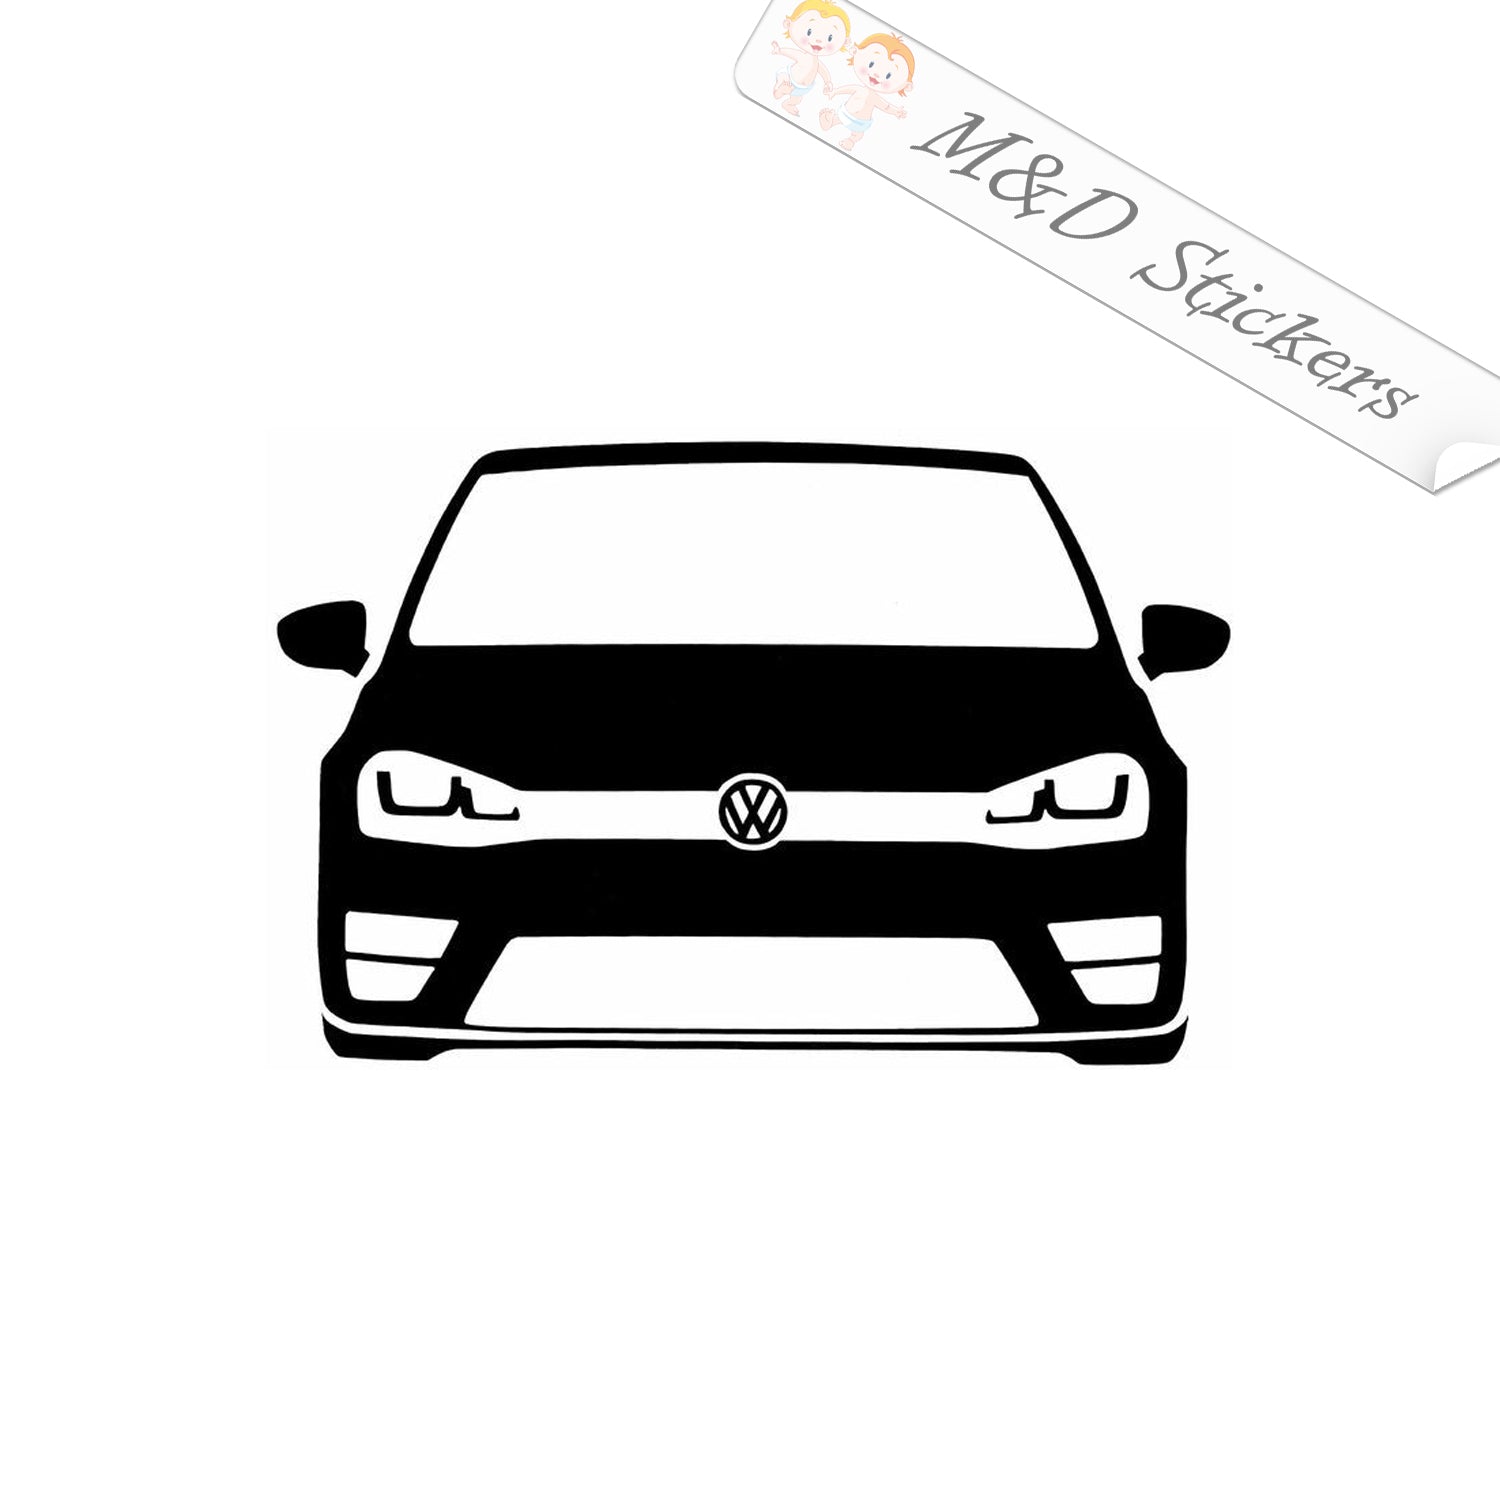 Volkswagen new 'R line' logo car stickers ( Pair of 2 stickers )